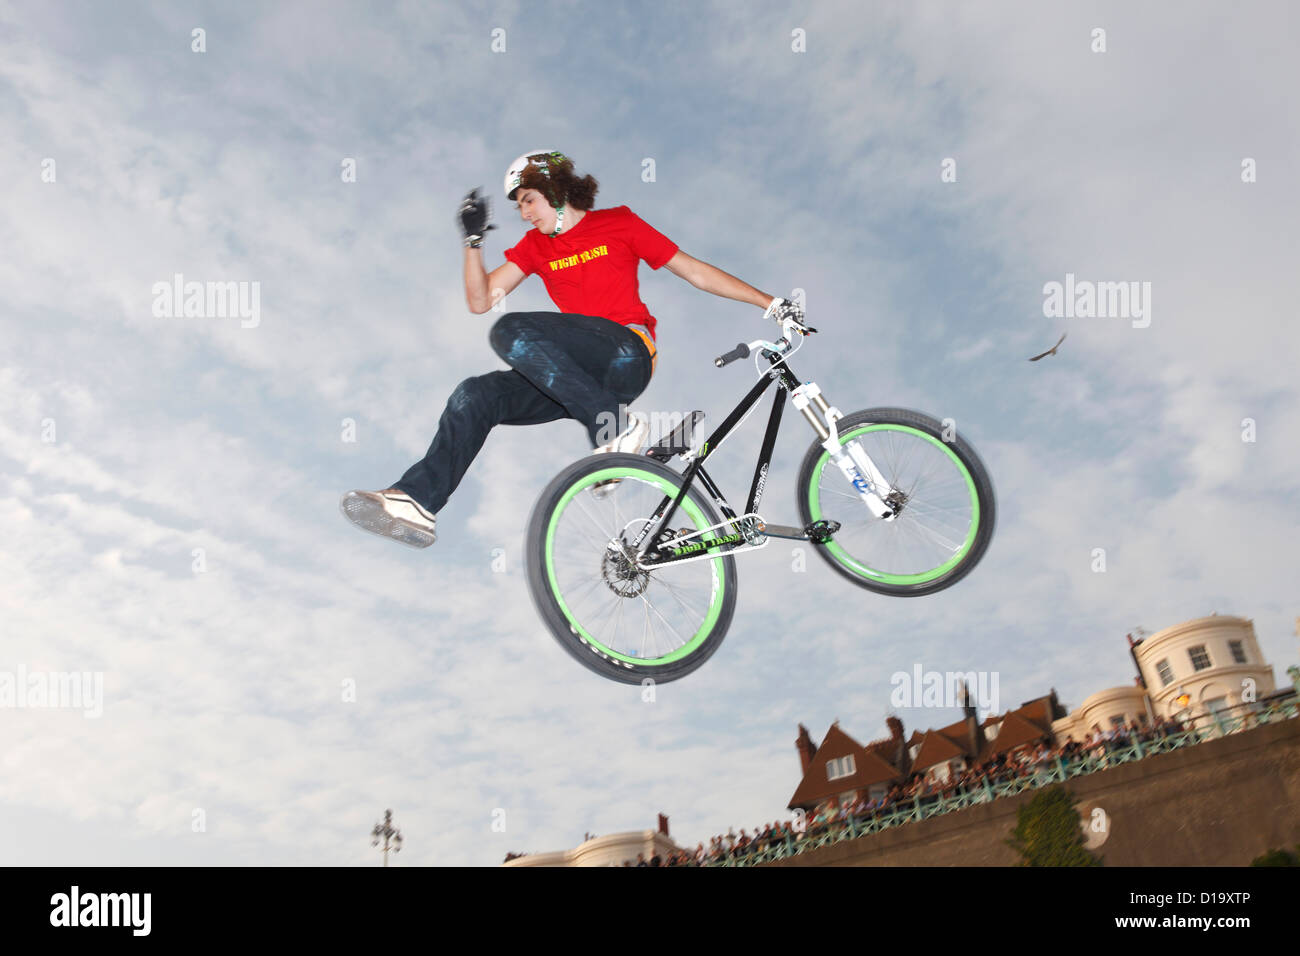 BMX Biker pulls off a trick while flying through the air after jumping off a kicker at the White Air festival, Brighton, UK. Stock Photo